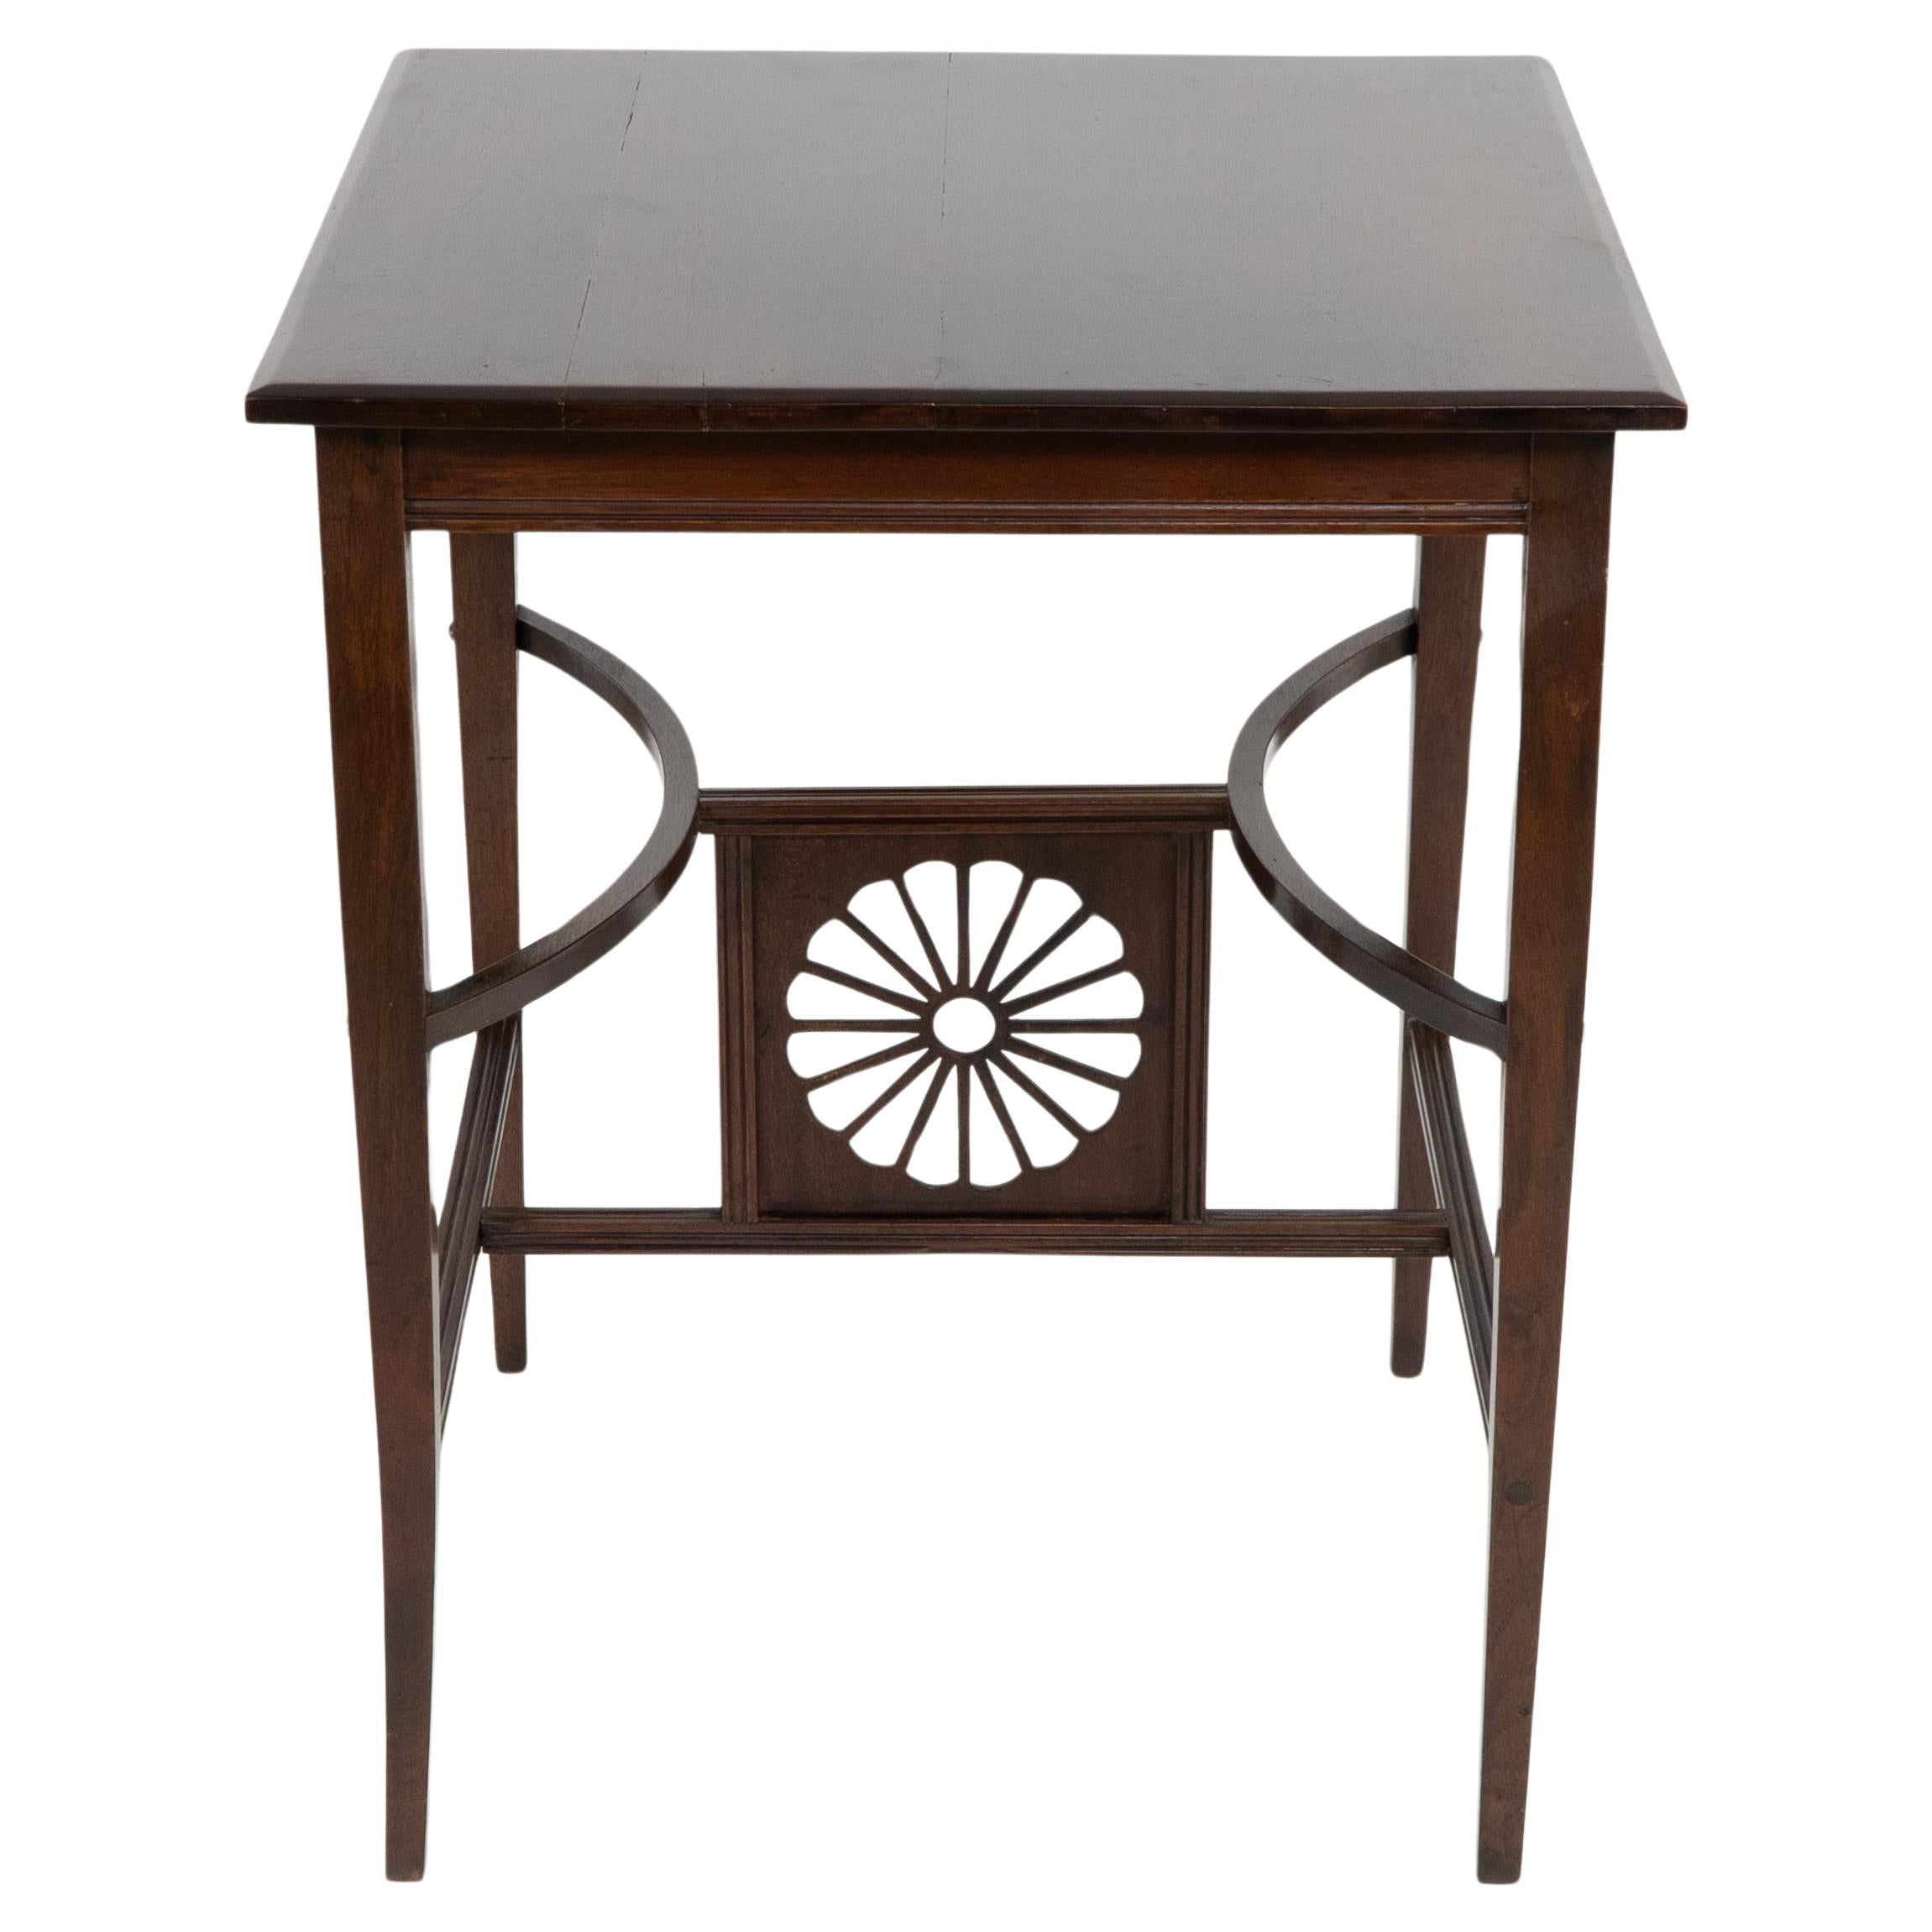 Aesthetic Movement side table with sunflower & curved & straight side stretchers For Sale